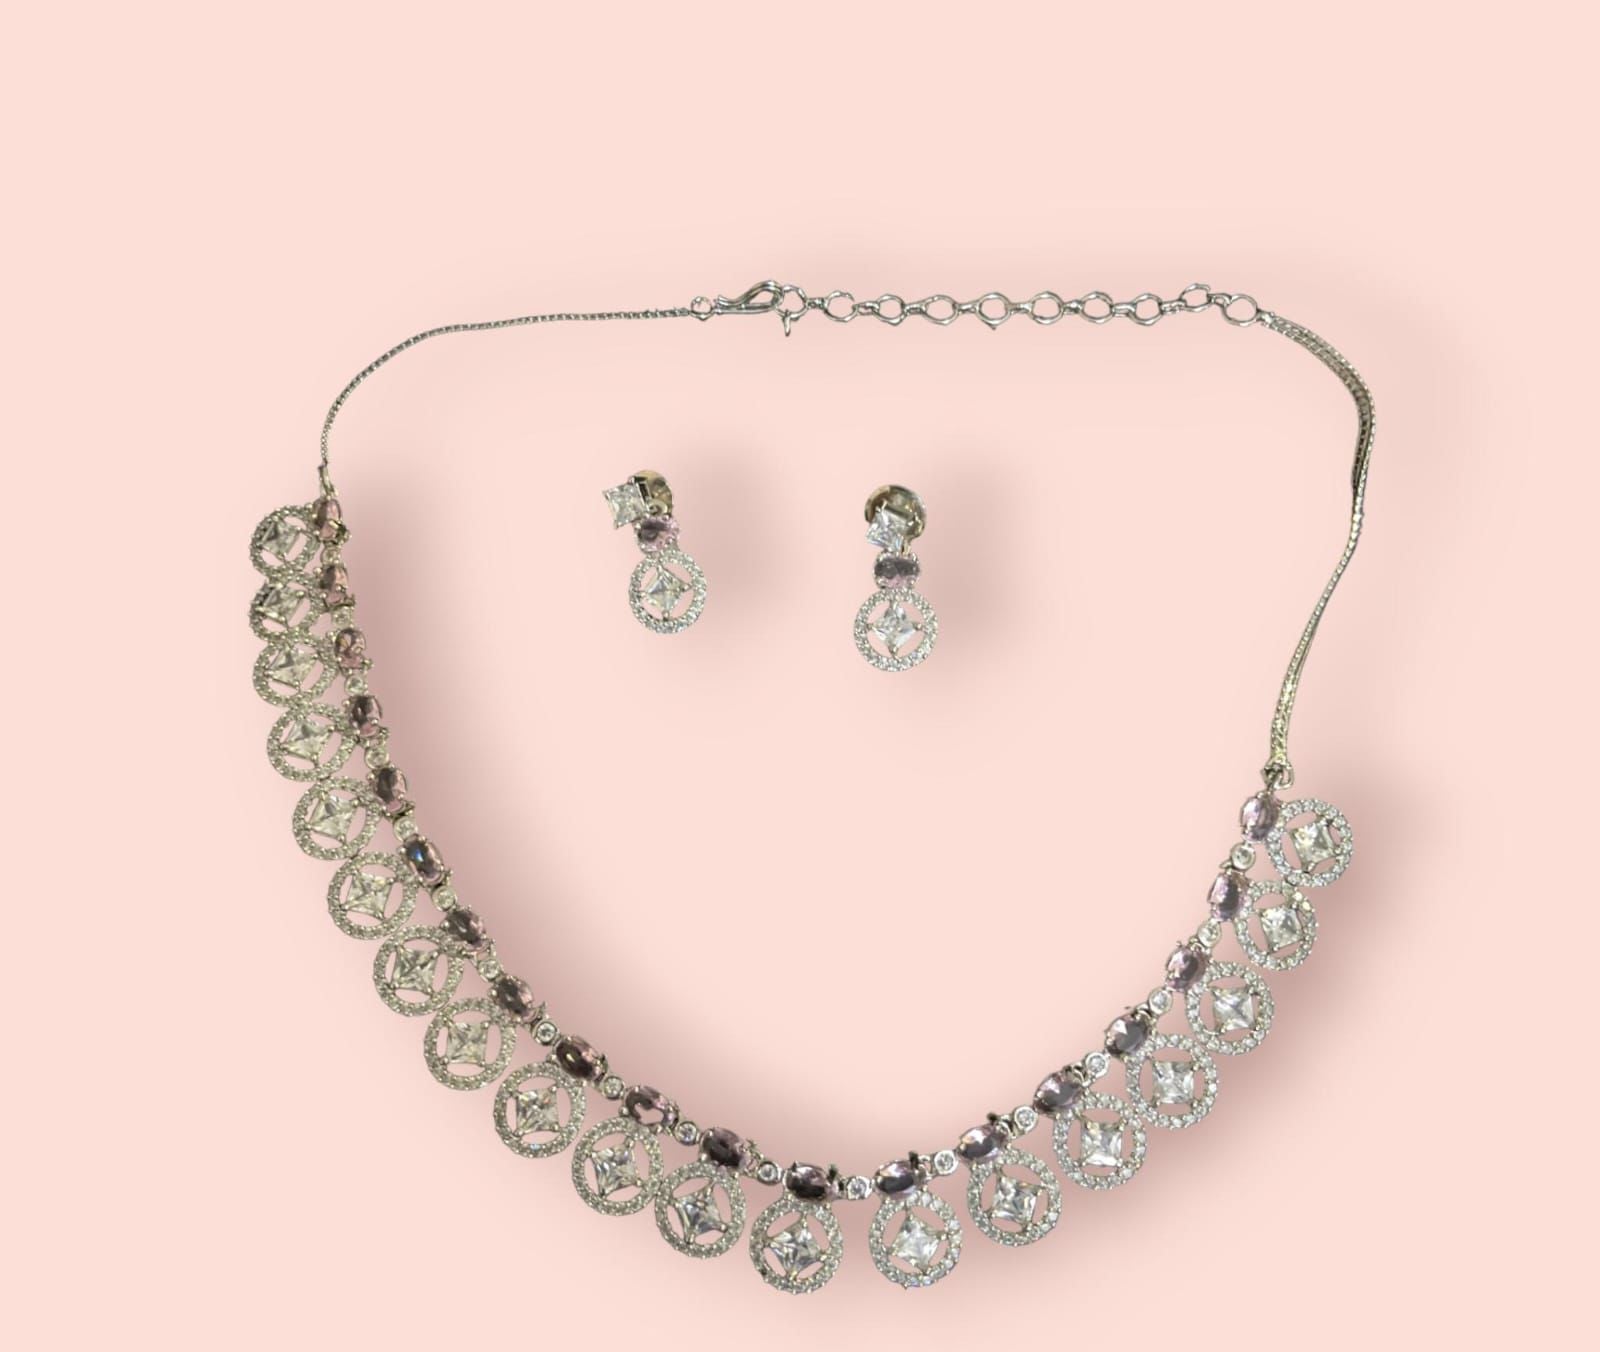 Silver plated necklace set with high quality zircon stones